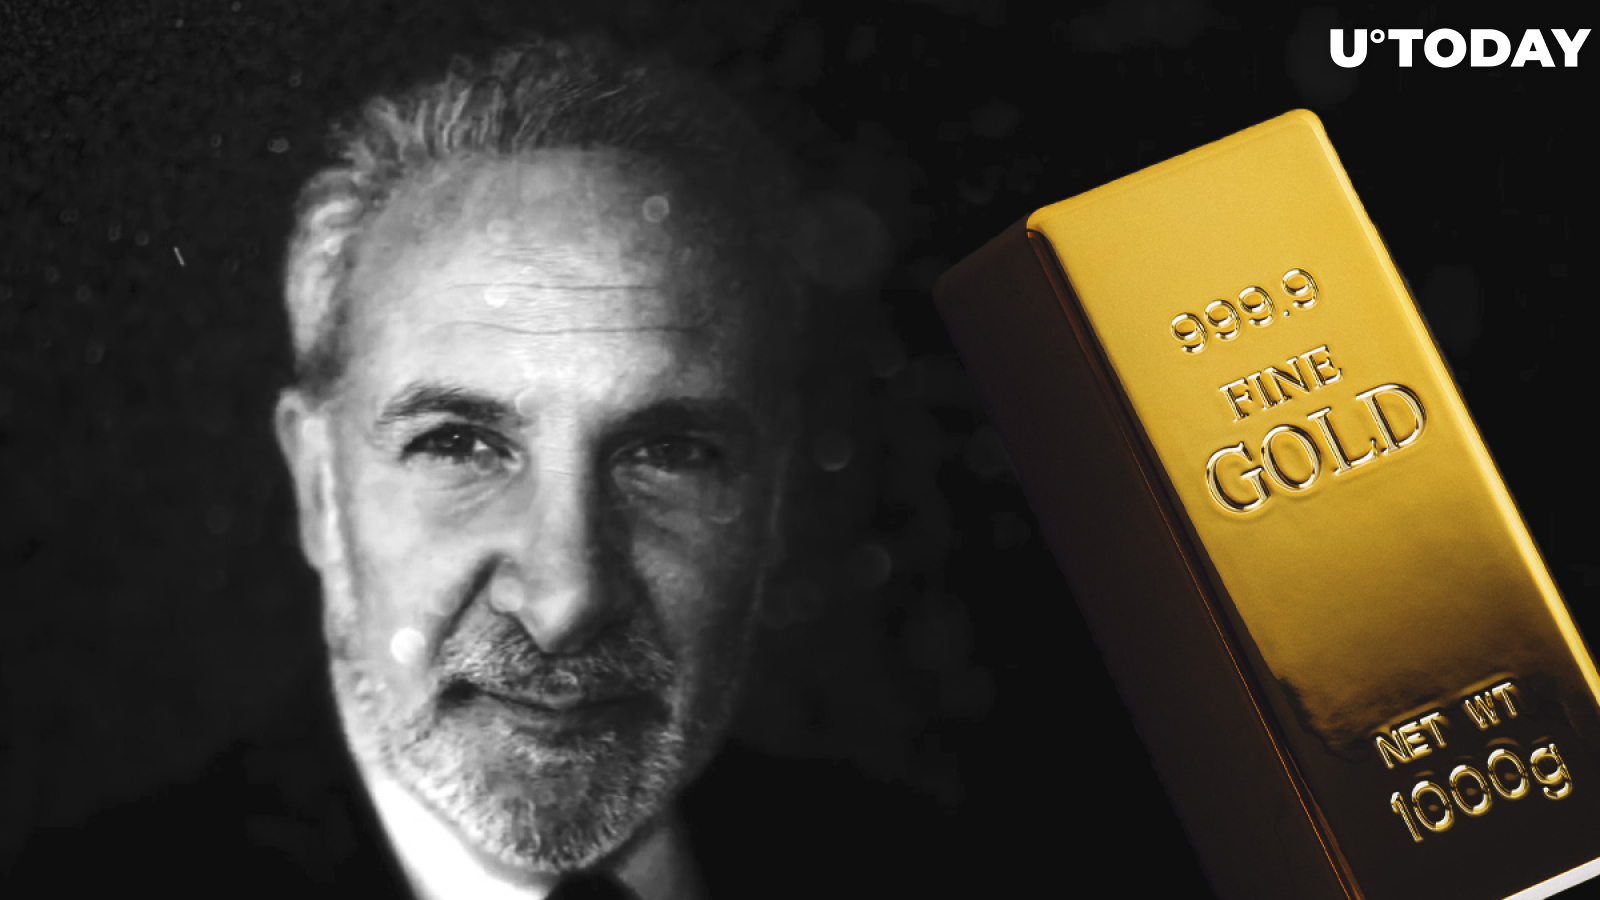 Peter Schiff Says Companies Grabbing Bitcoin Don’t Rush to Part with Their Gold